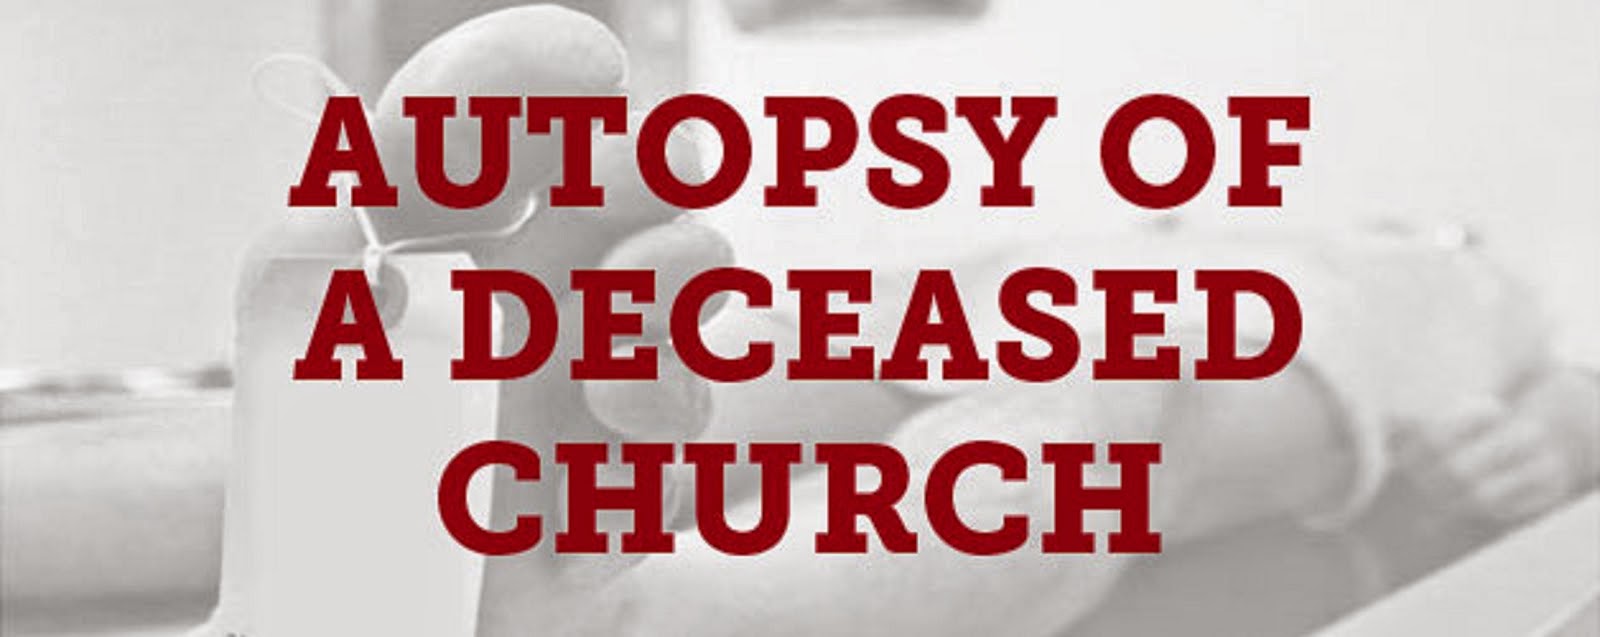 AUTOPSY OF A DECEASED CHURCH